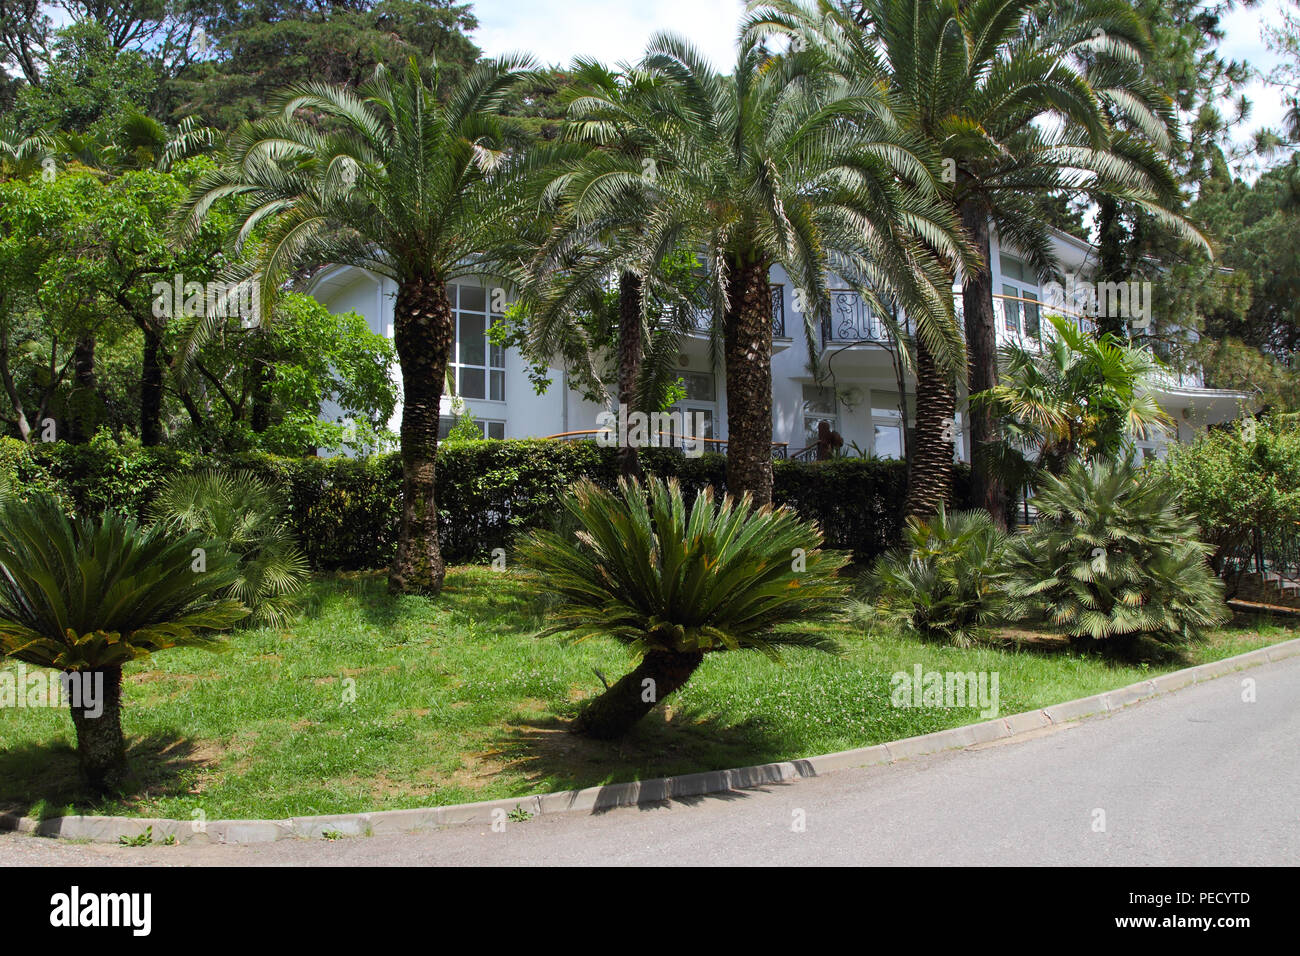 The two-storey house stands surrounded by picturesque palm trees. Stock Photo